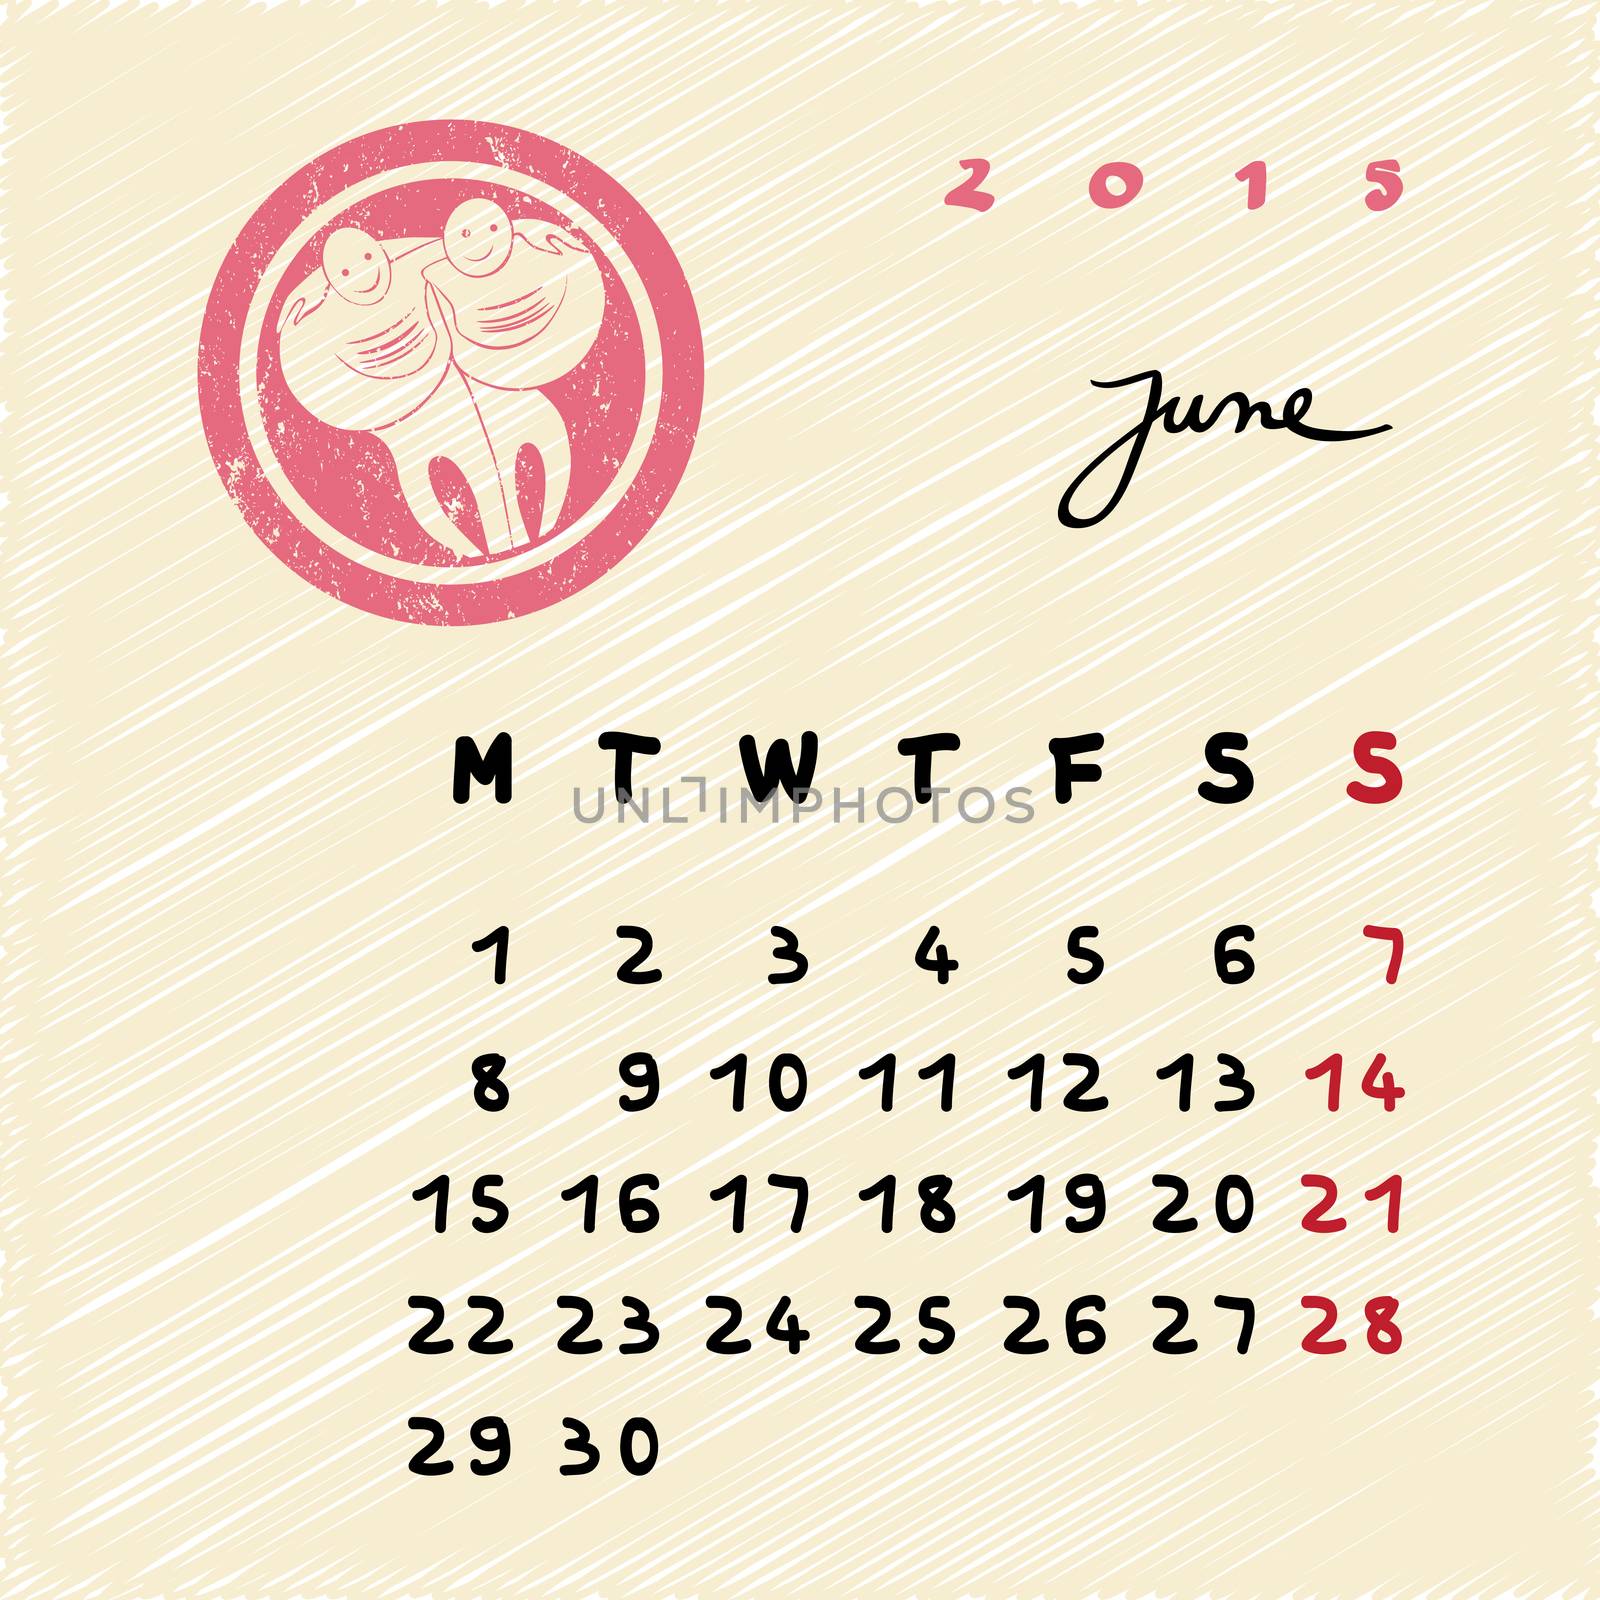 Calendar 2015 page illustration with zodiac sign of Gemini as grungy stamp over a colored scribble background, June